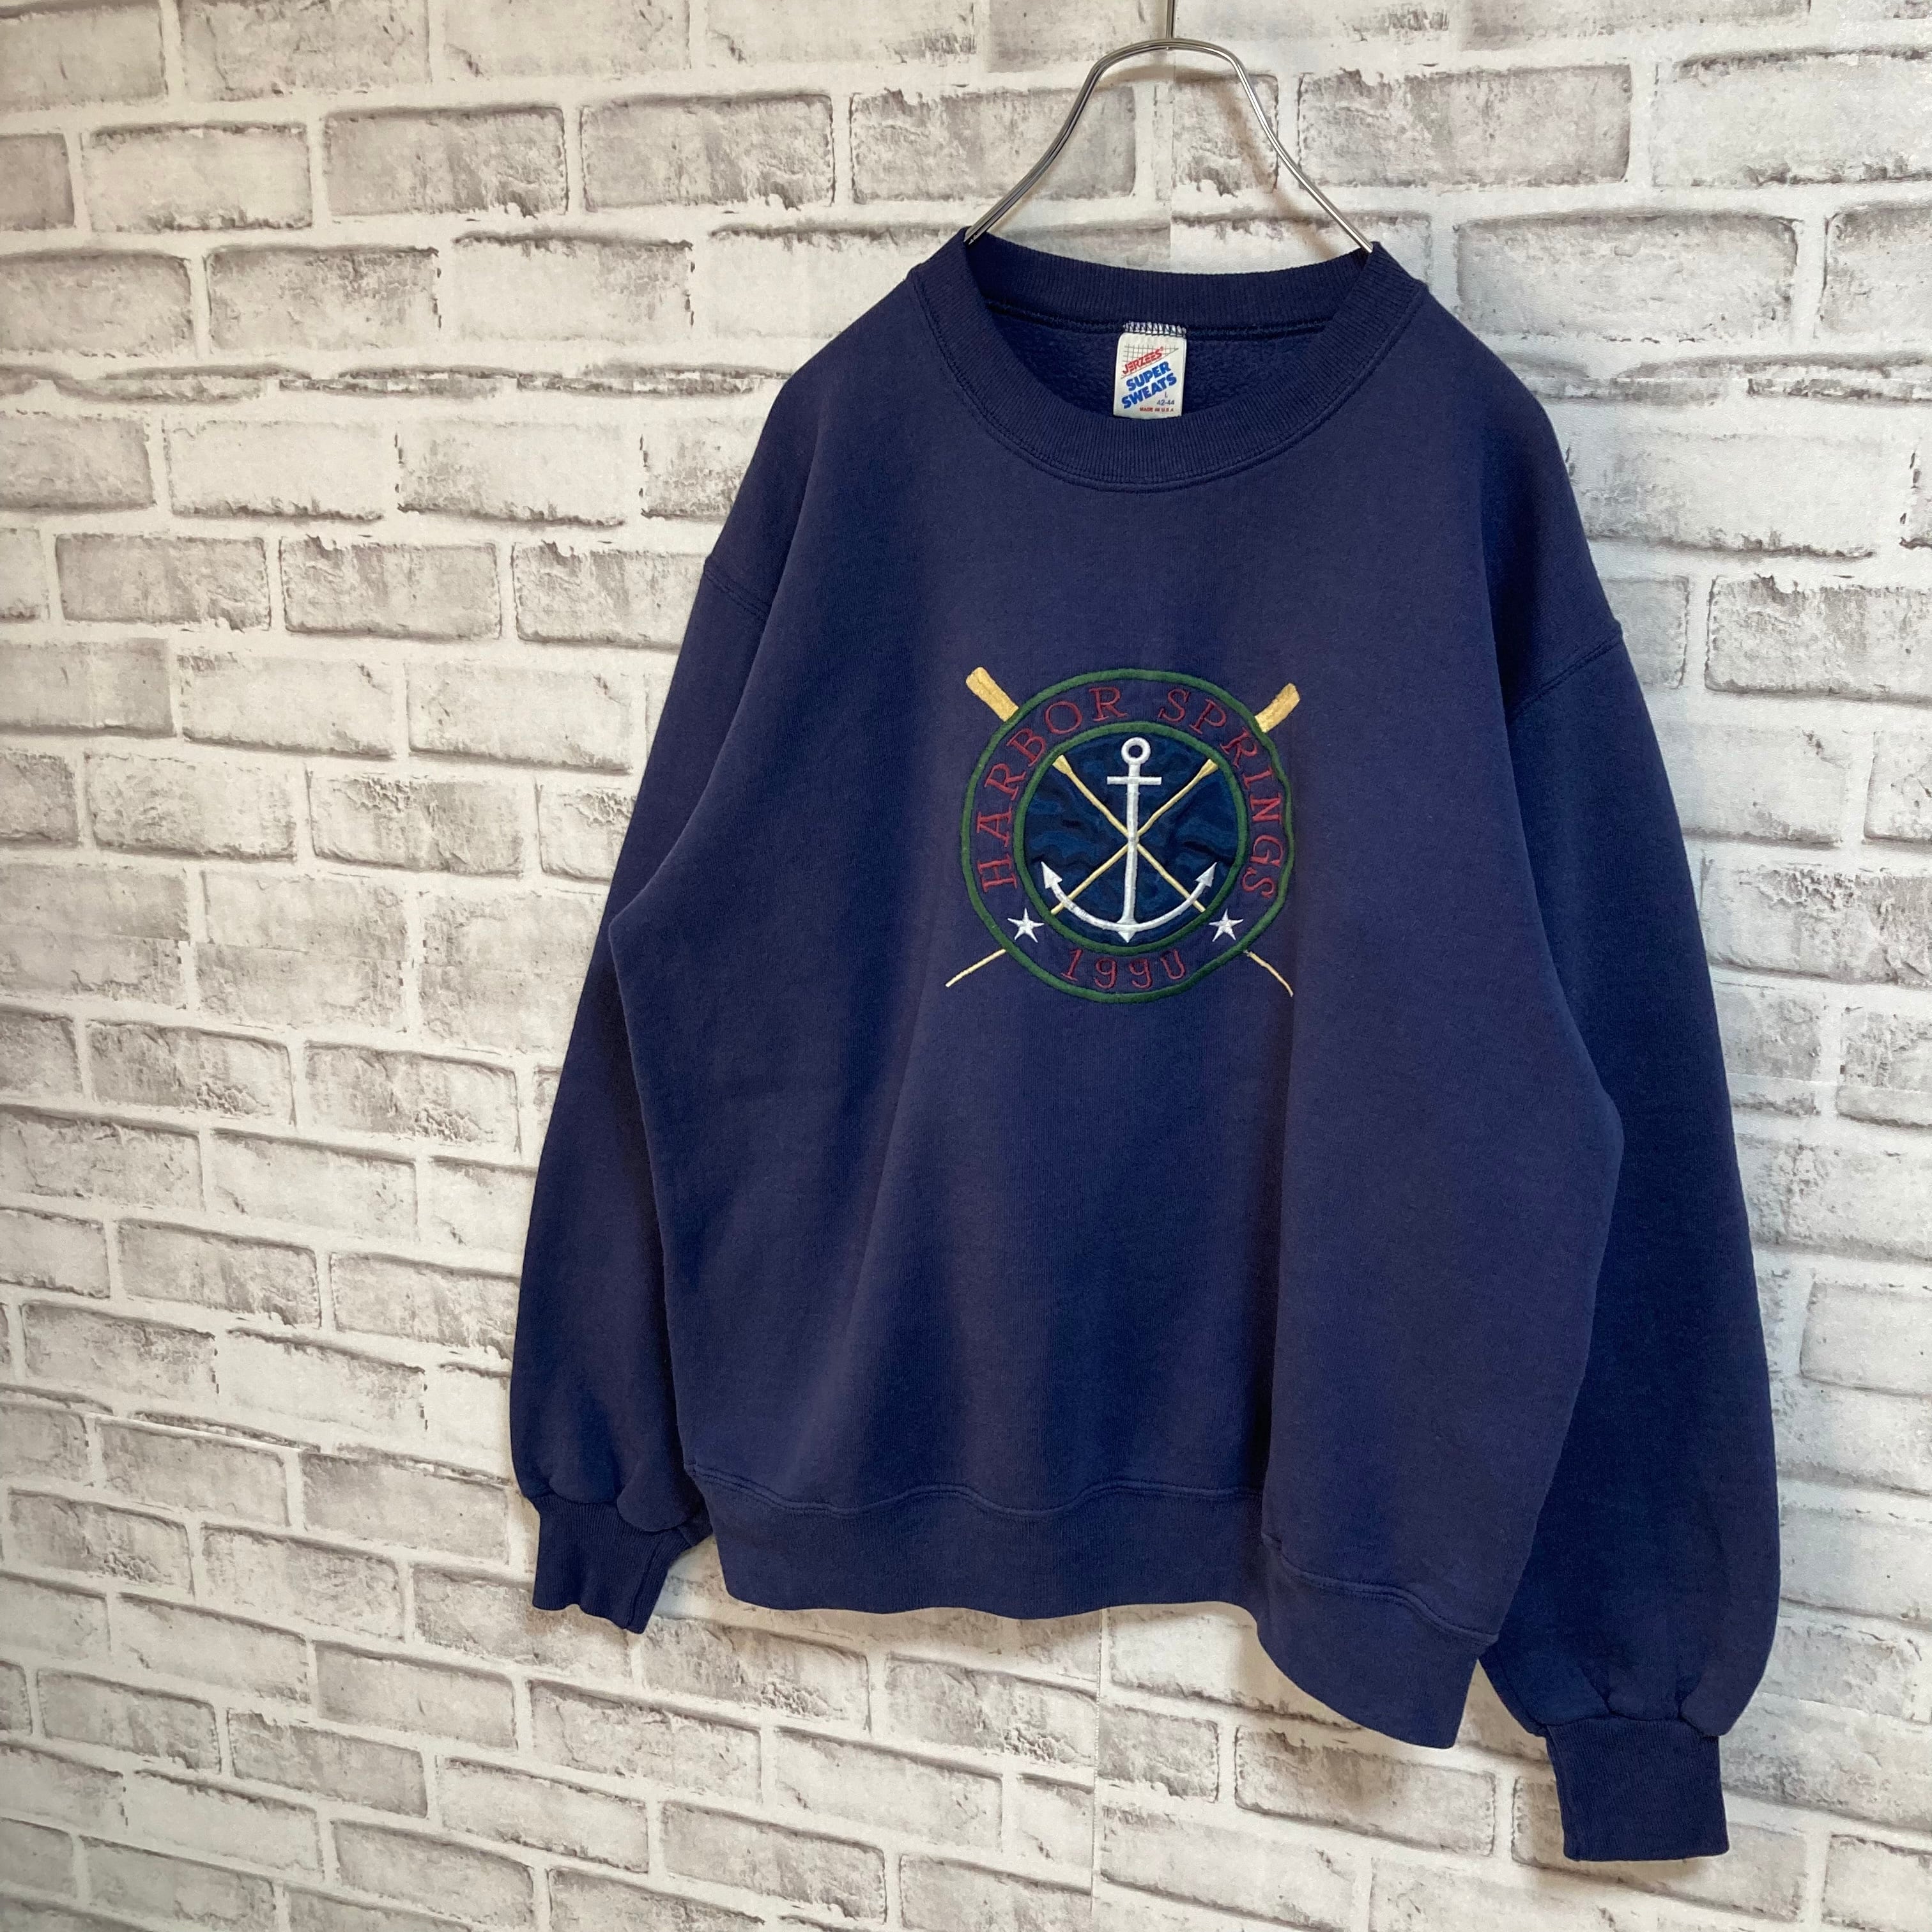 JERZEES】L/S Sweat L Made in USA 90s ジャージーズ スウェット